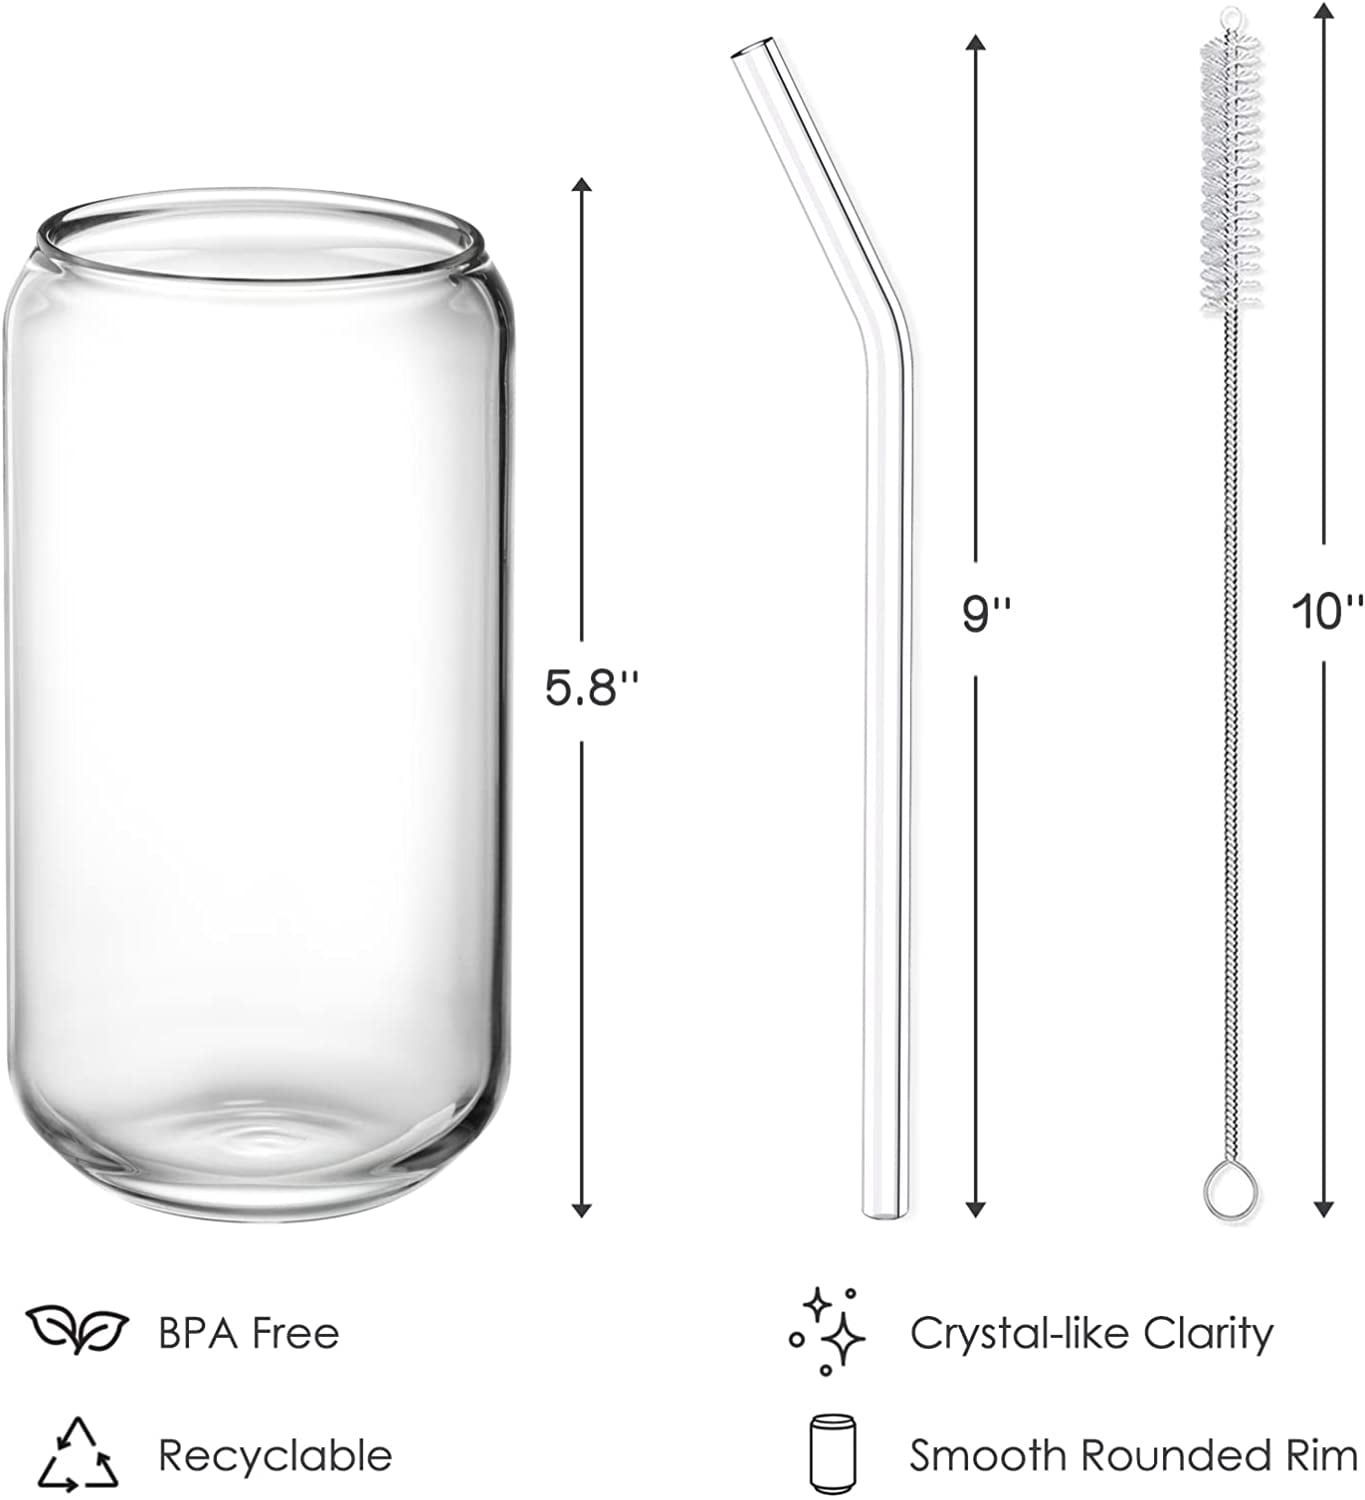 HuaQi Glass Cups with Lids and Straws 4pcs Set, Beer Glasses with Silicone  Lids and Metal Straw,16oz…See more HuaQi Glass Cups with Lids and Straws